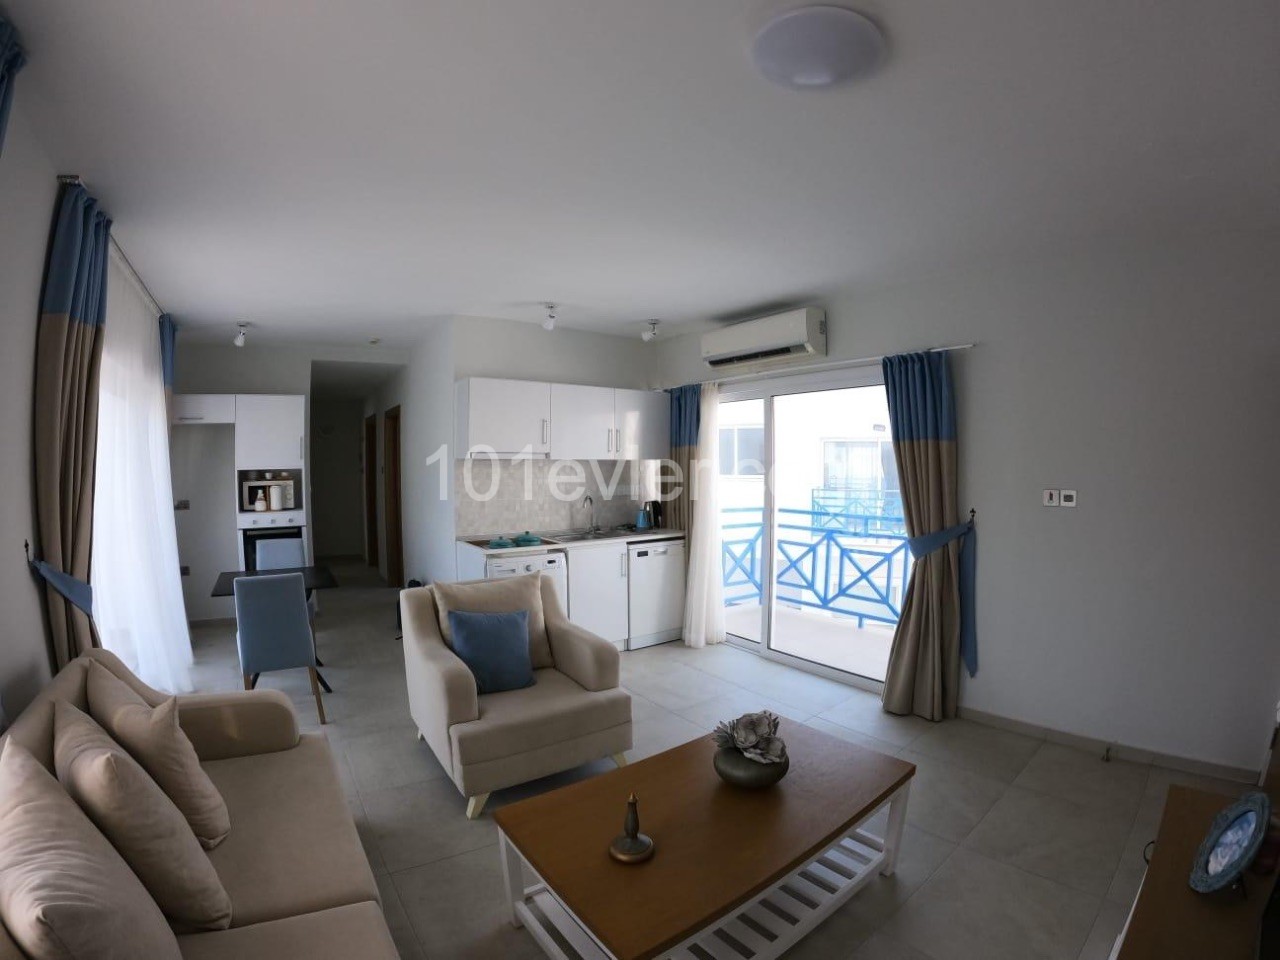 GIRNE-ALSANCAK , 2+1 PENTHOUSE , FURNISHED , GREAT SEA AND MOUNTAIN VIEWS , POOL , CLOSE TO BEACH